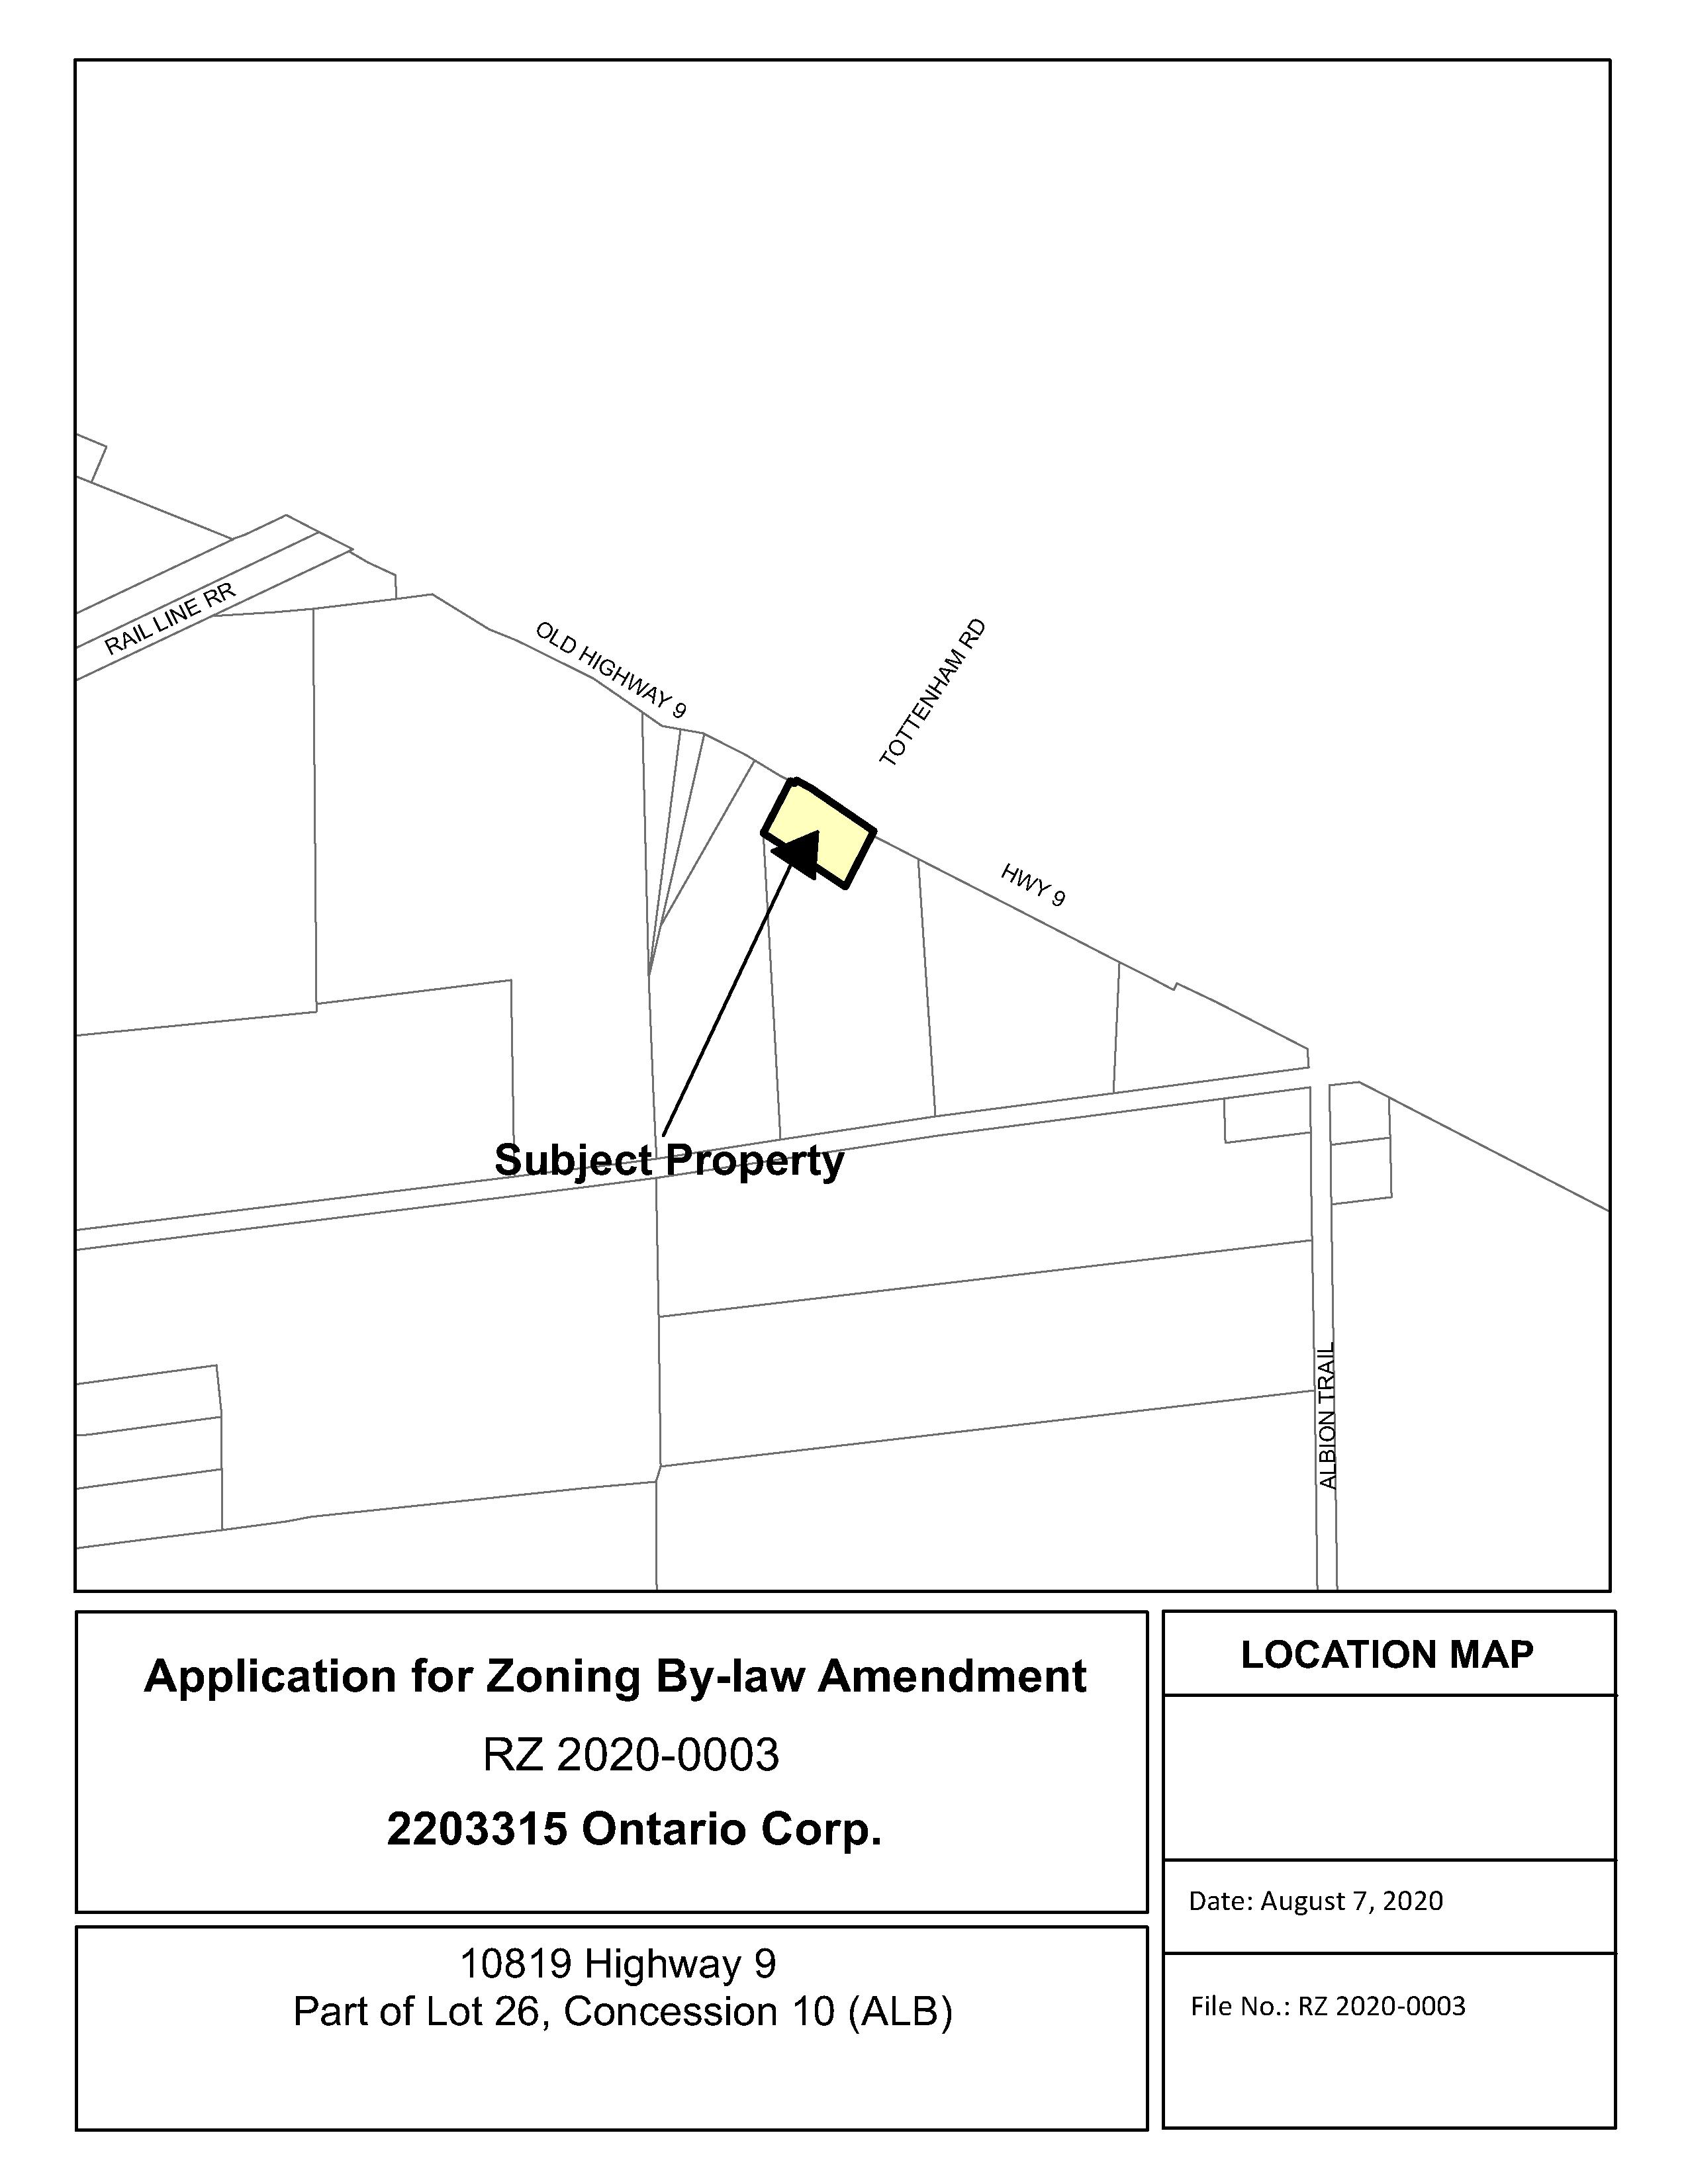 Map of Subject Property at 10819 Highway 9